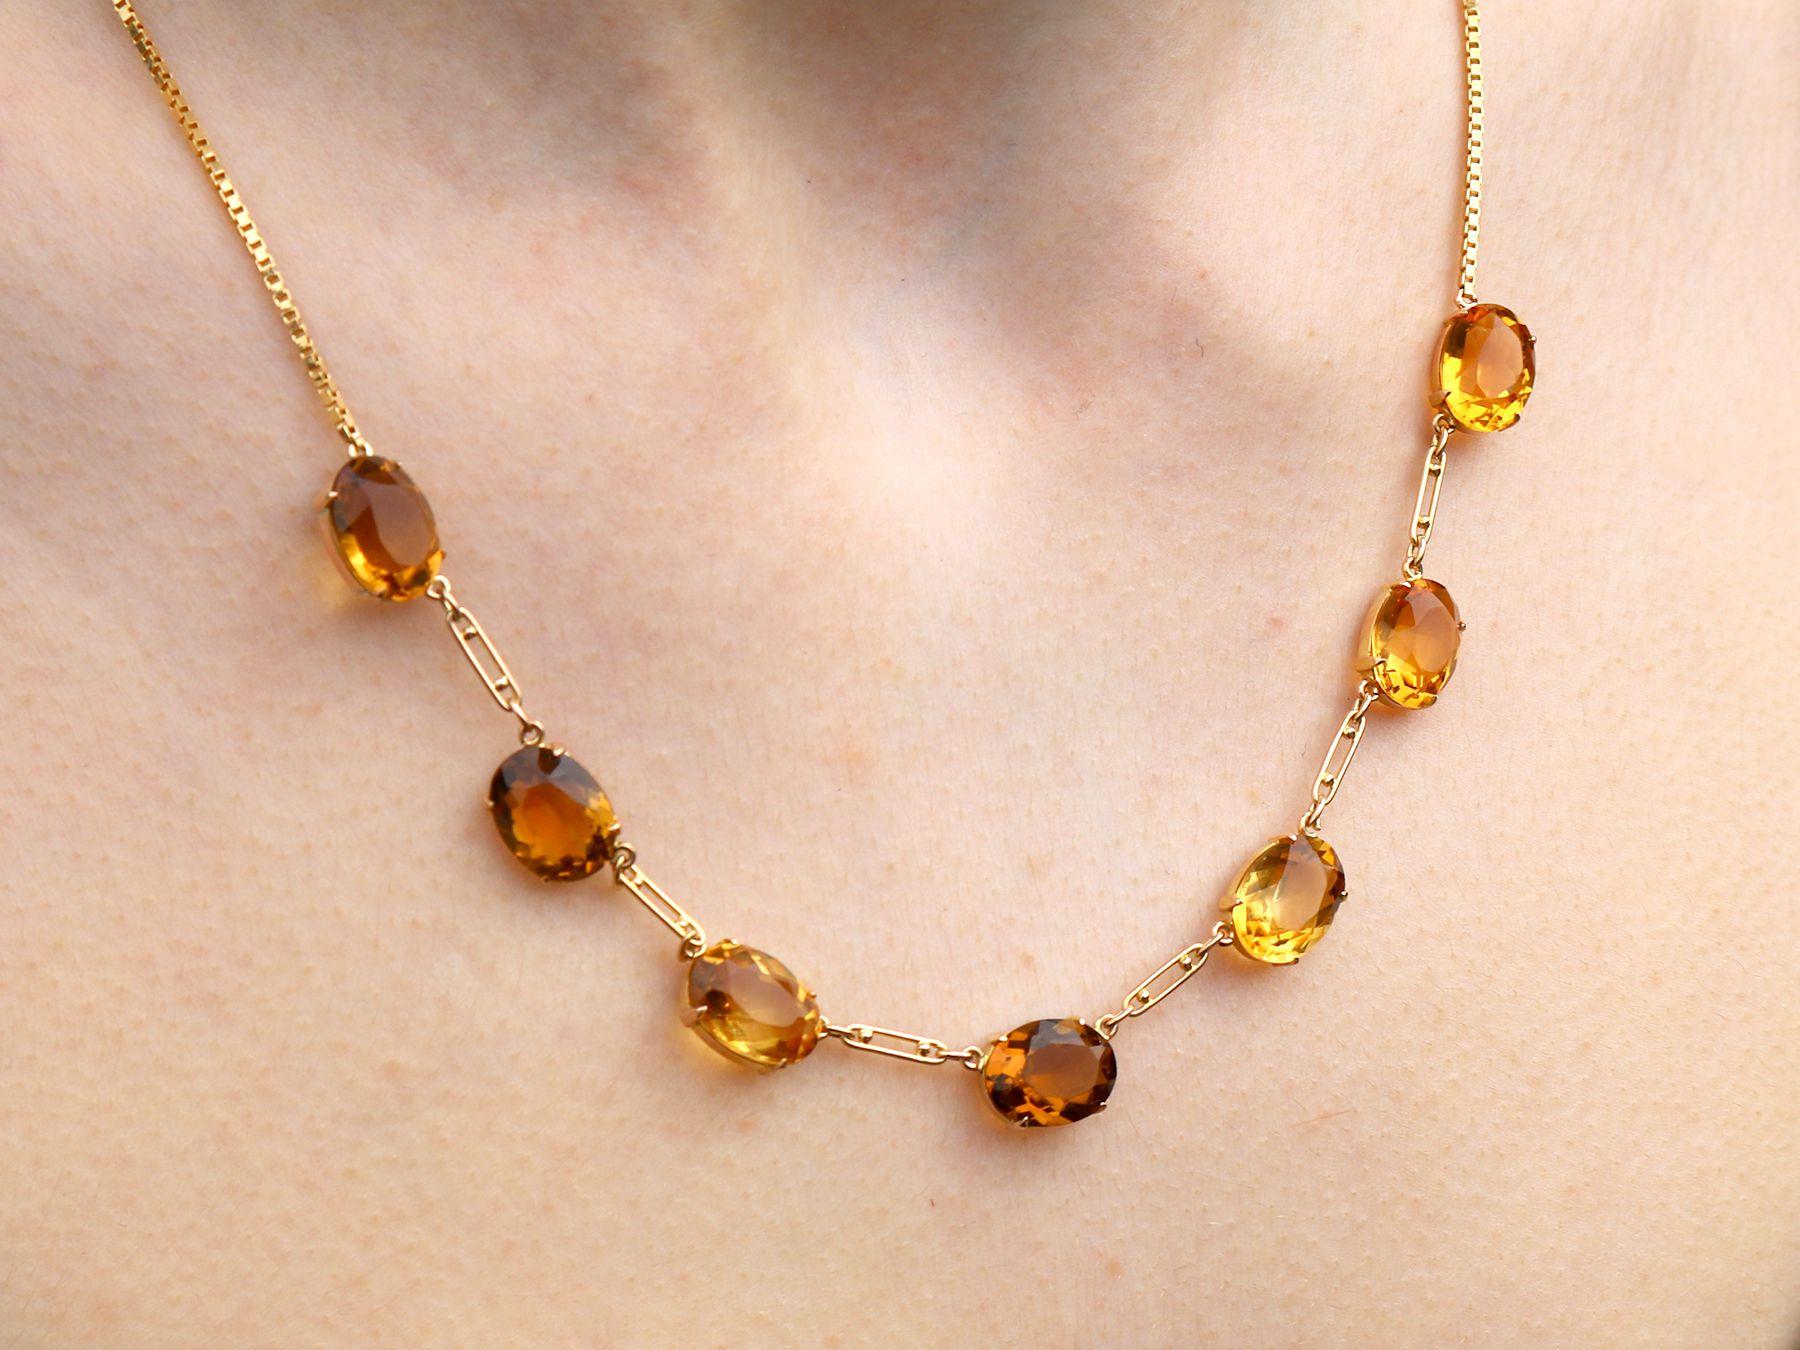 Vintage 24.57ct Citrine and 9ct Yellow Gold Necklace For Sale 2